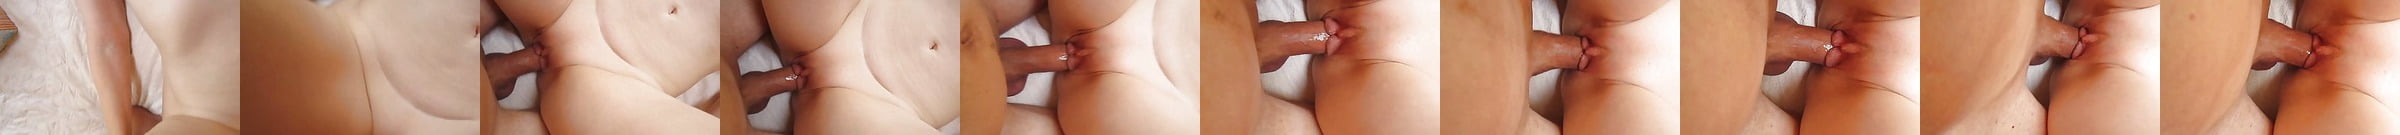 Featured Close Up Fucking Porn Videos Xhamster